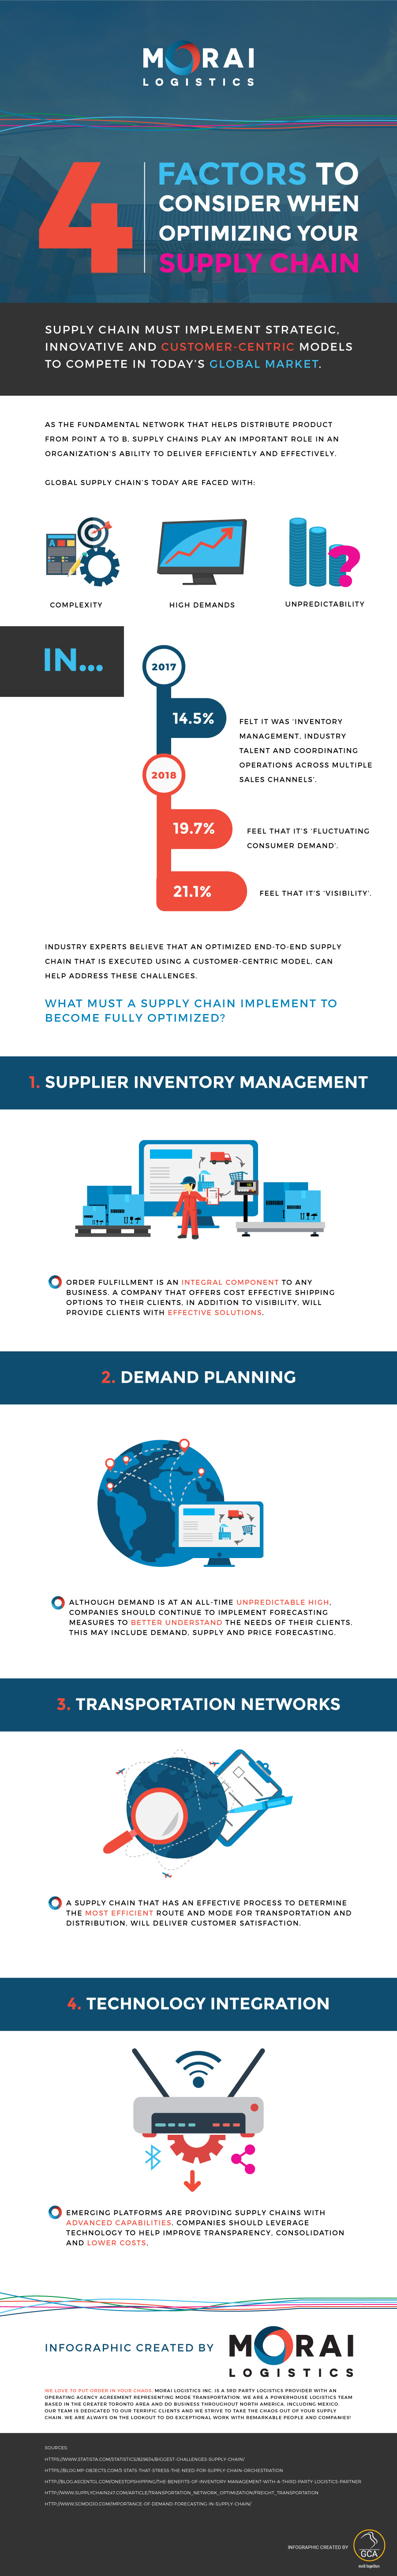 morai-infographic-4-factors-to-consider-when-optimizing-your-supply-chain